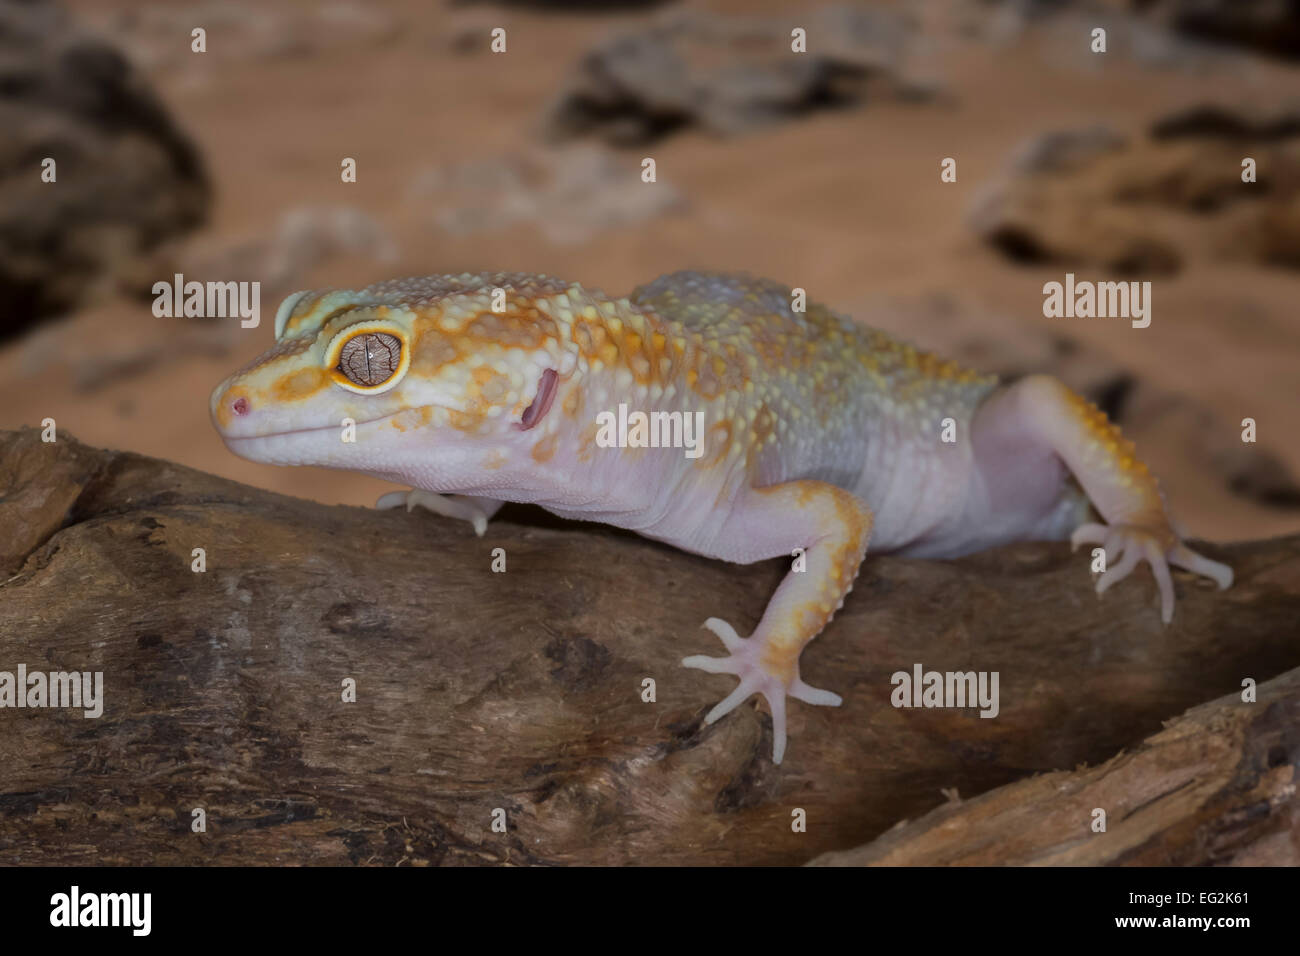 Full length close up photograph of a gecko resting on a log. side view Stock Photo